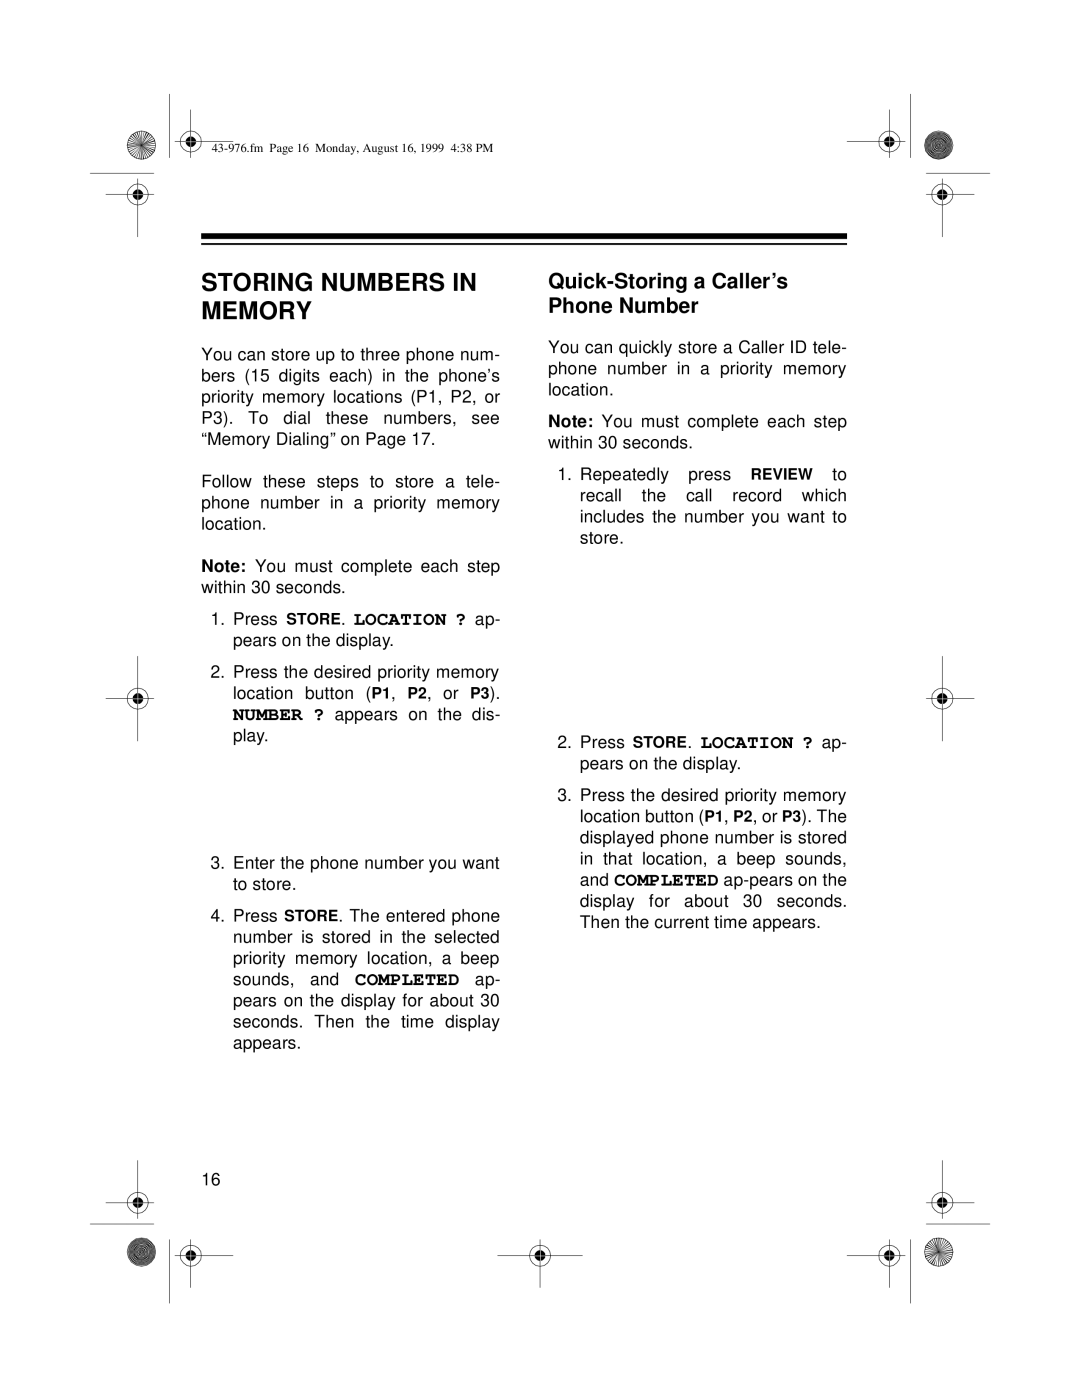 Radio Shack 1500 owner manual Storing Numbers In Memory, Quick-Storing a Caller’s Phone Number 